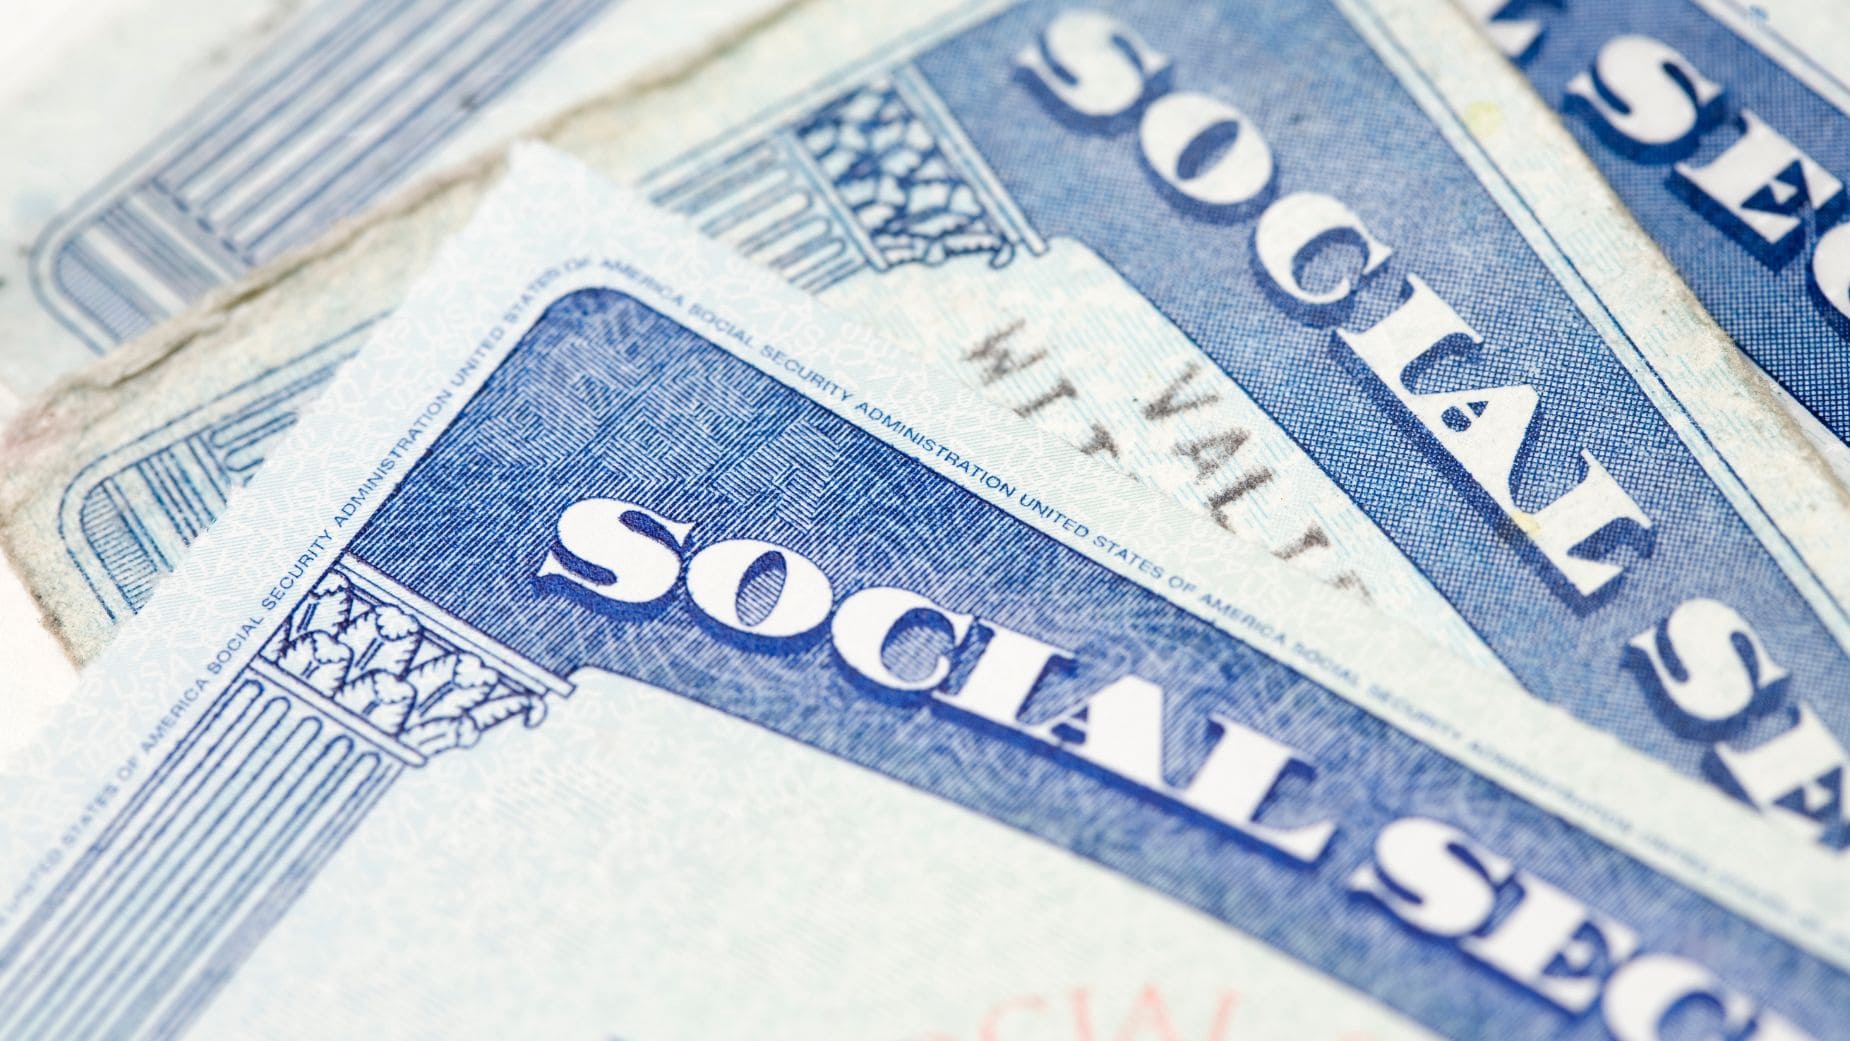 Find out how you can speed up your Social Security payment day